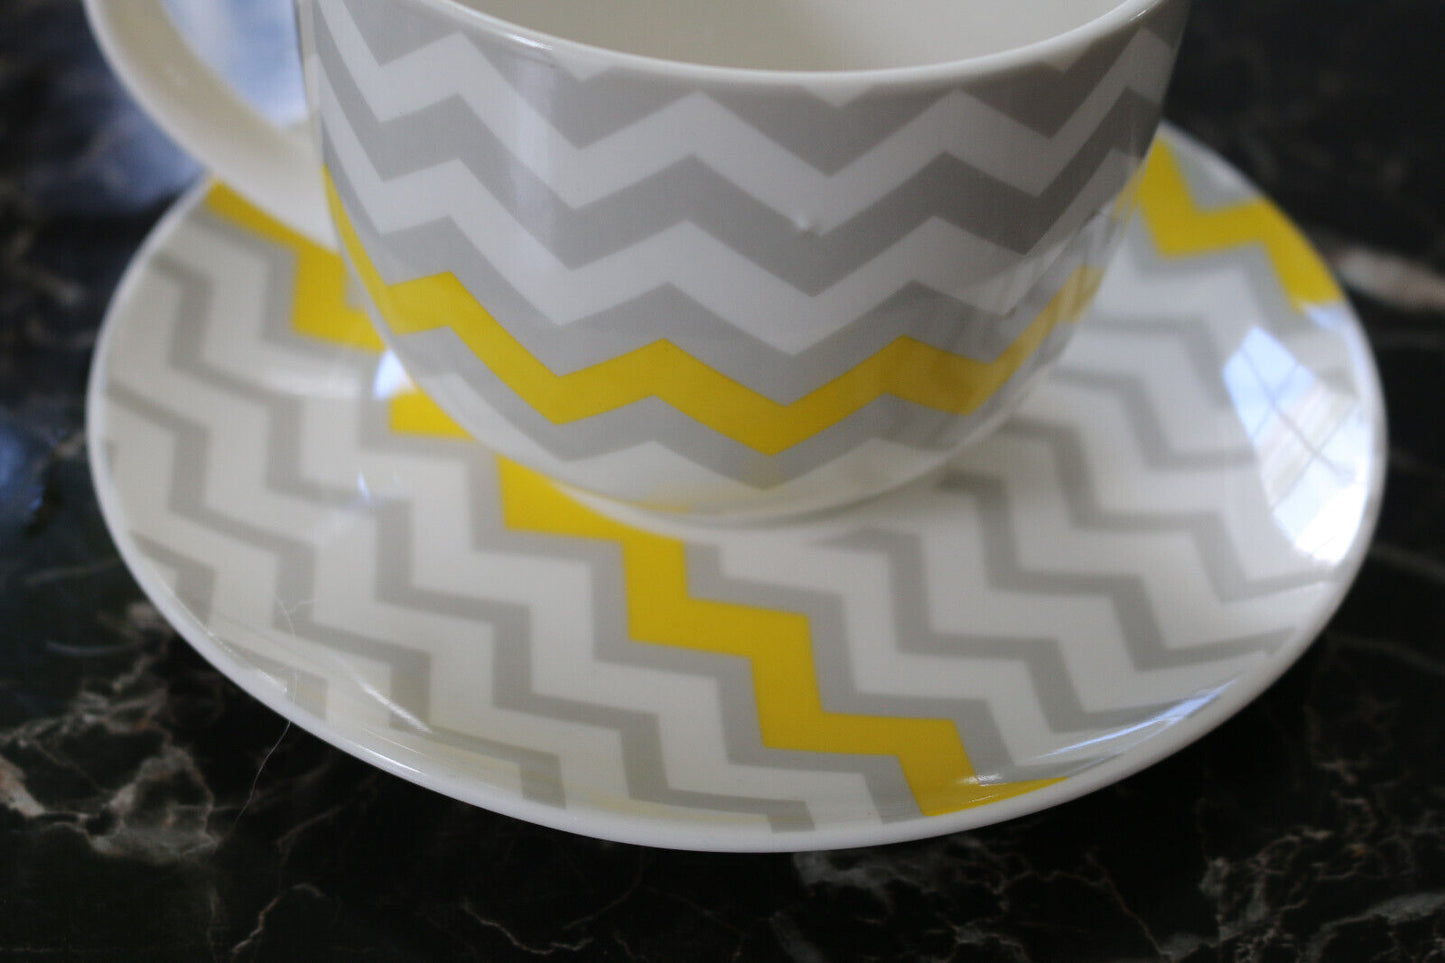 Maxwell & Williams Colour Bolt Breakfast Cup & Saucer 475Ml Yellow Gift Claire